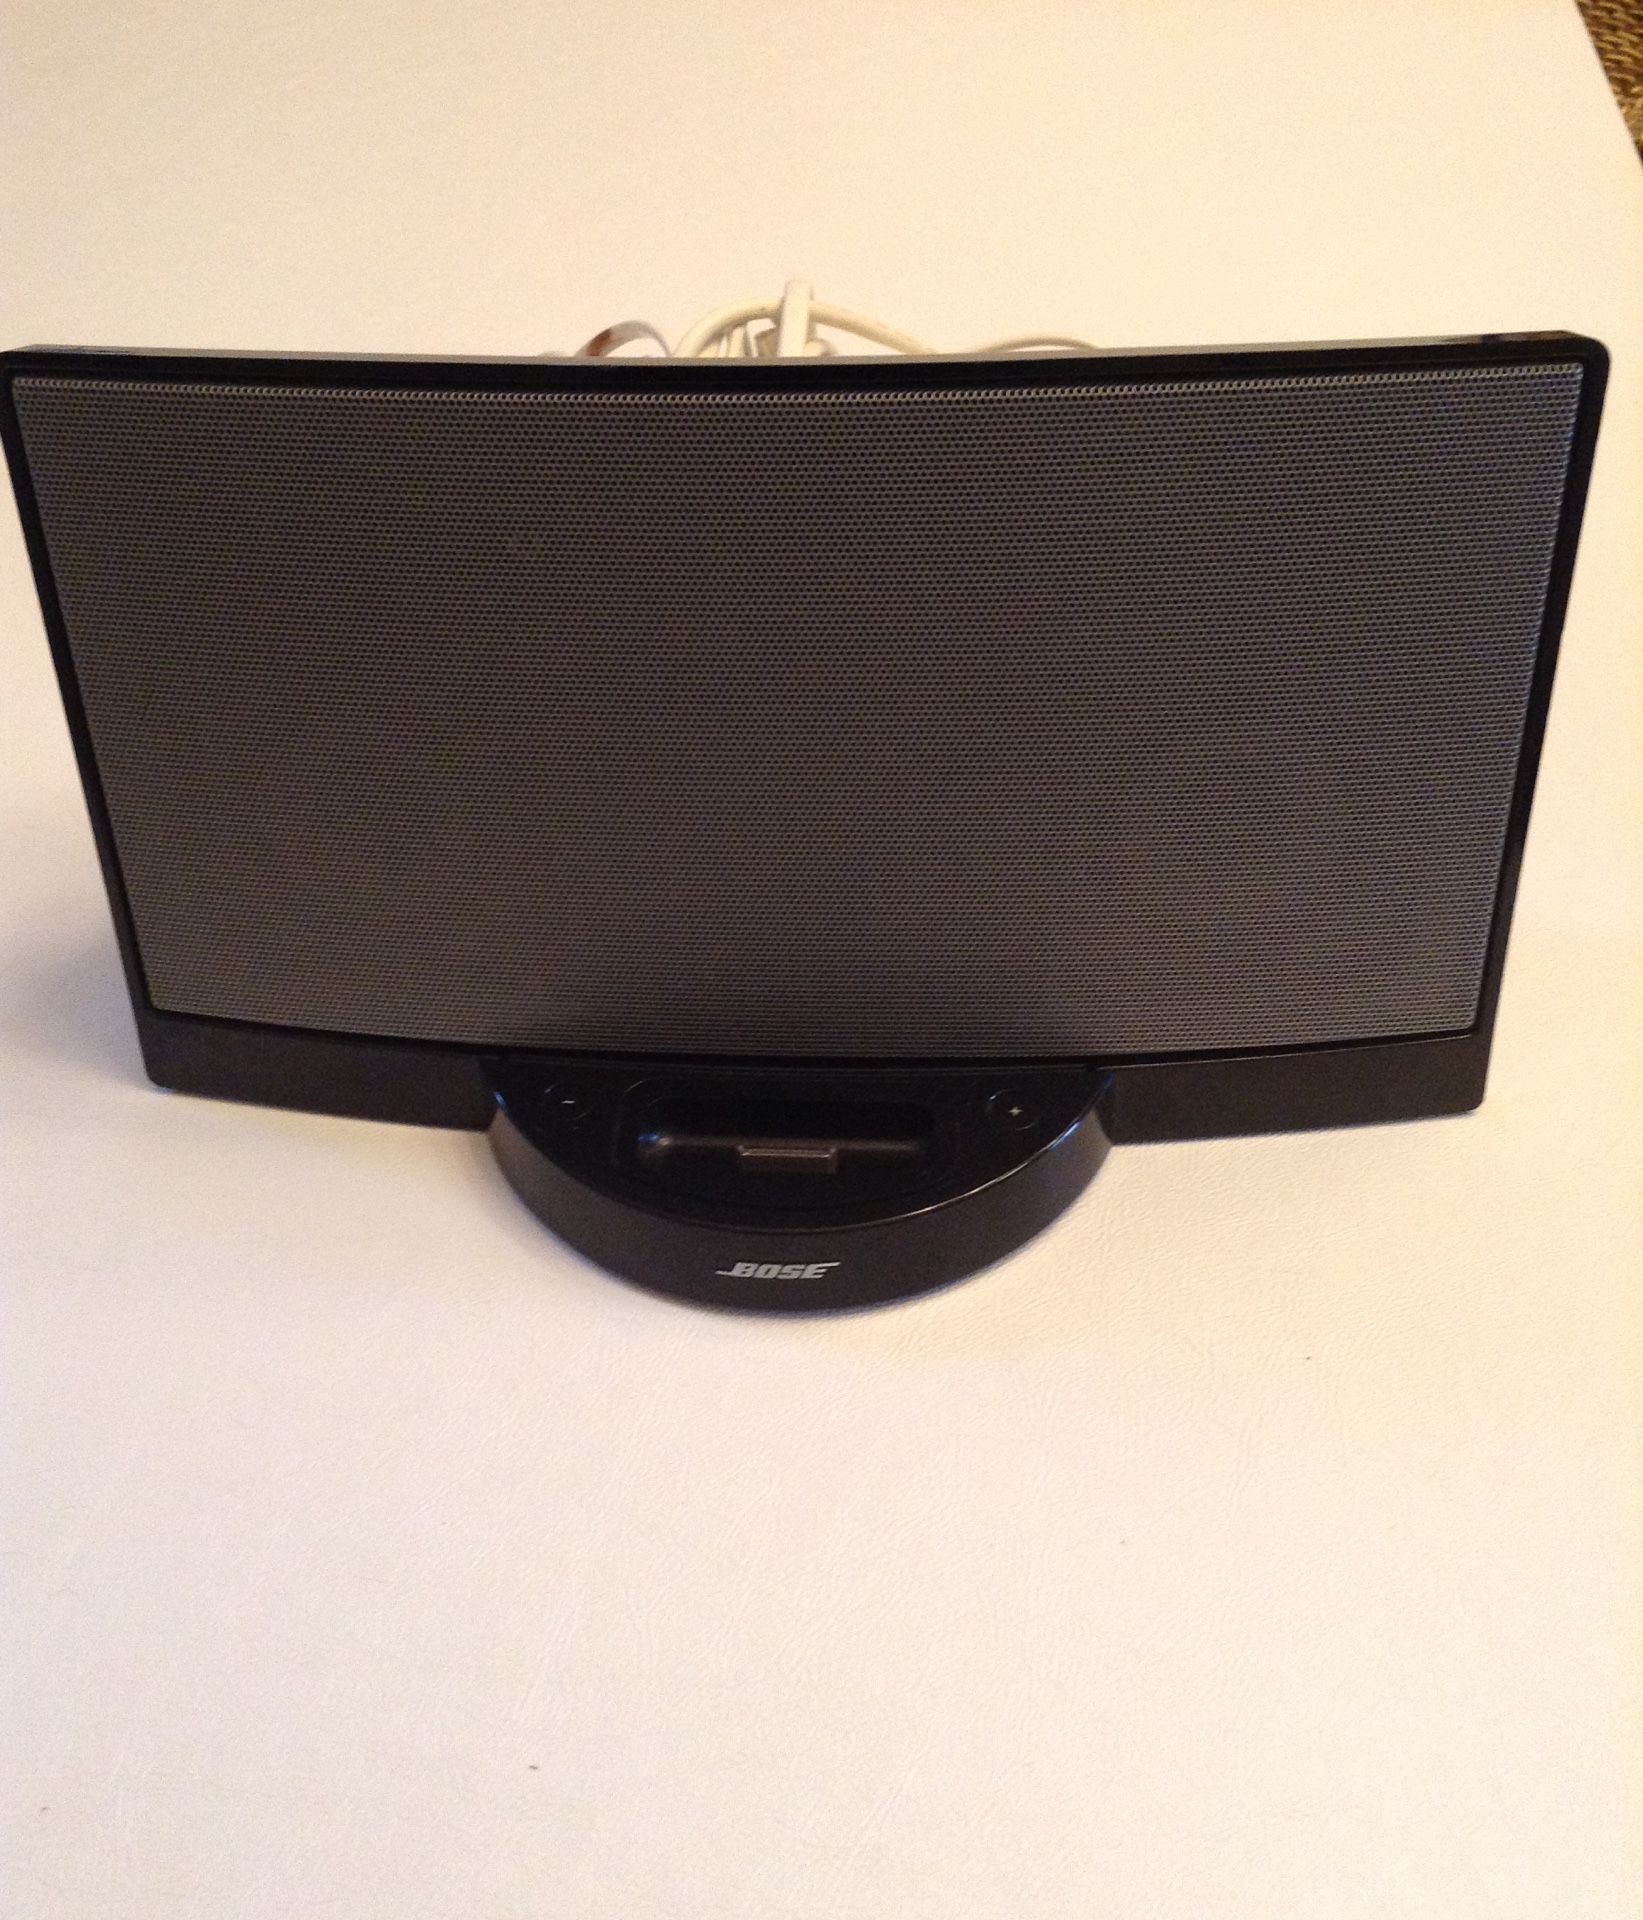 BOSE SOUND DOCK AND POWER CORD. PERFECT CONDITION